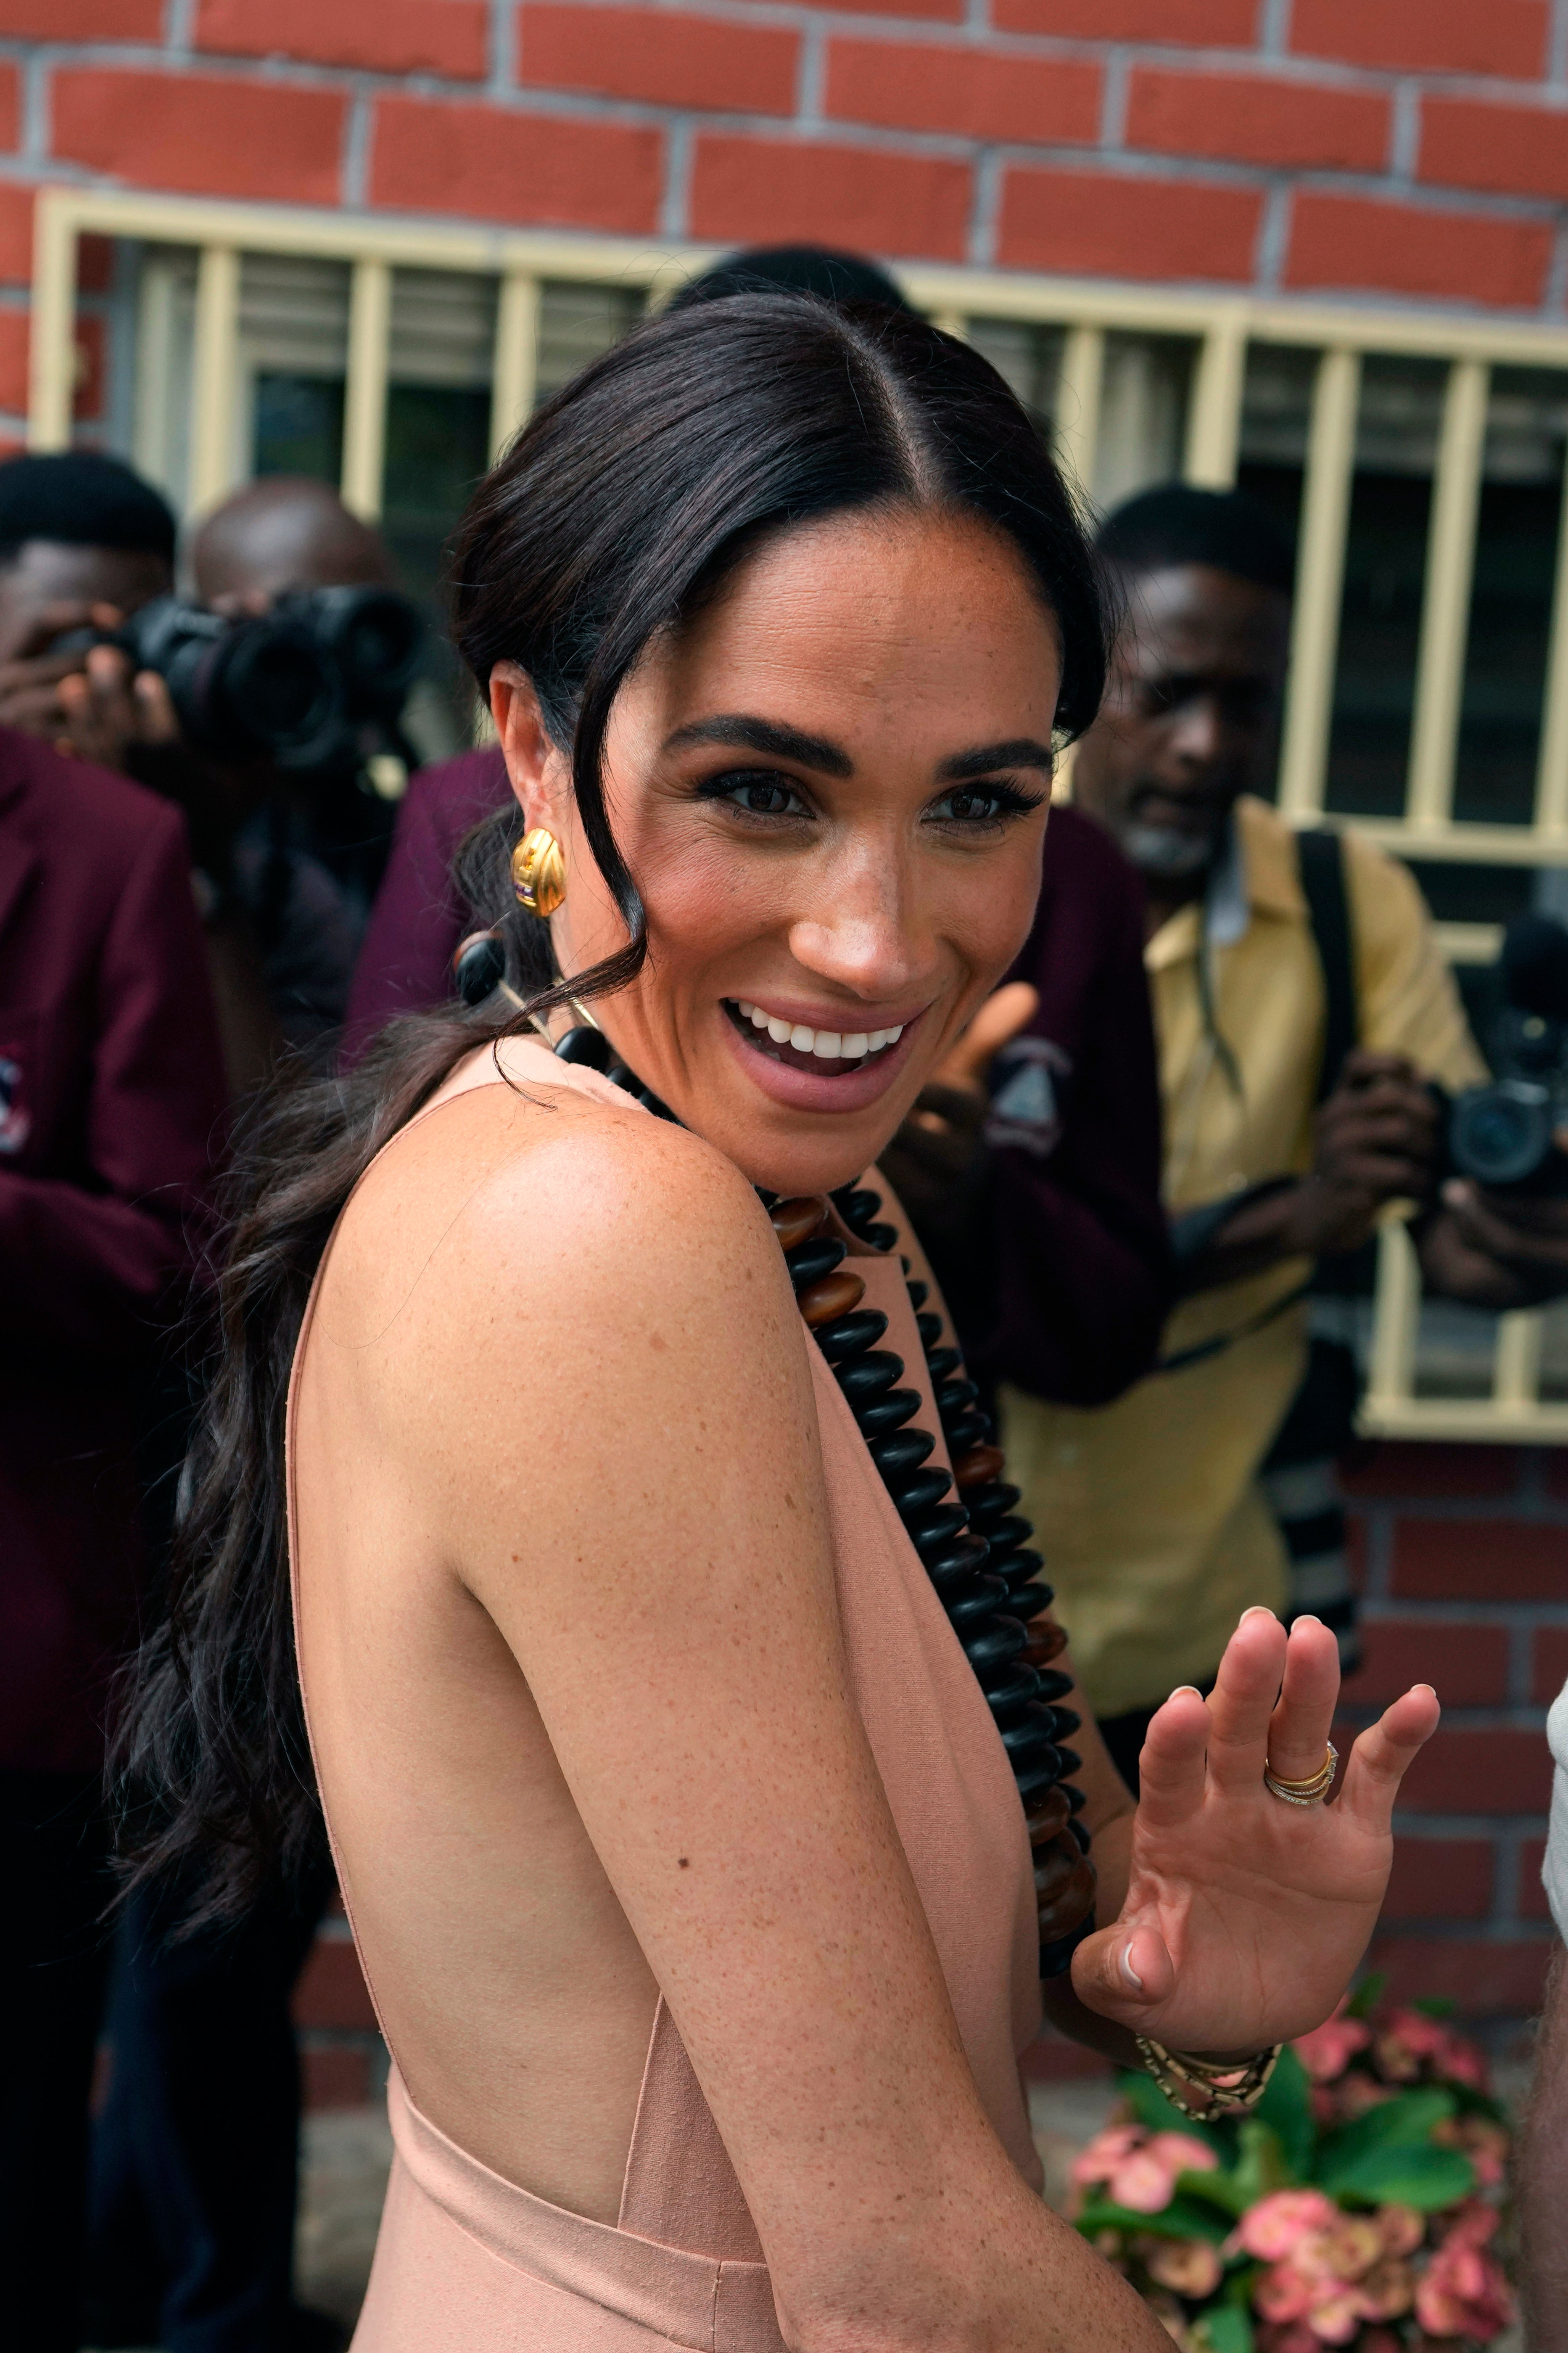 Nigeria's first lady apparently criticized Meghan Markle's 'nudity'